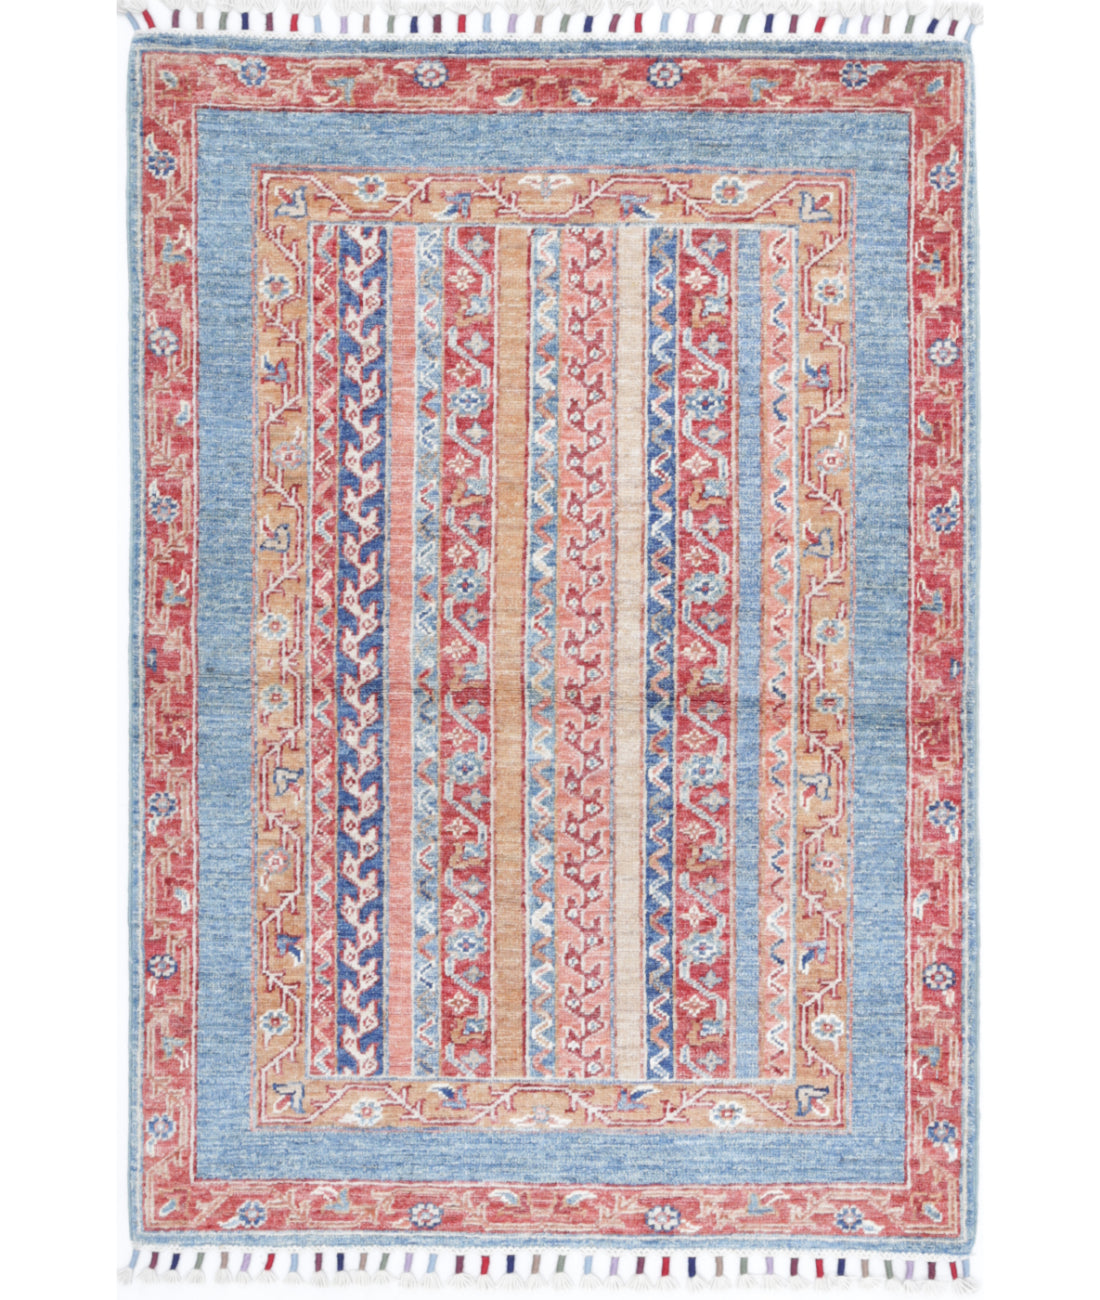 Hand Knotted Shaal Wool Rug - 2'8'' x 3'11'' 2'8'' x 3'11'' (80 X 118) / Multi / Multi